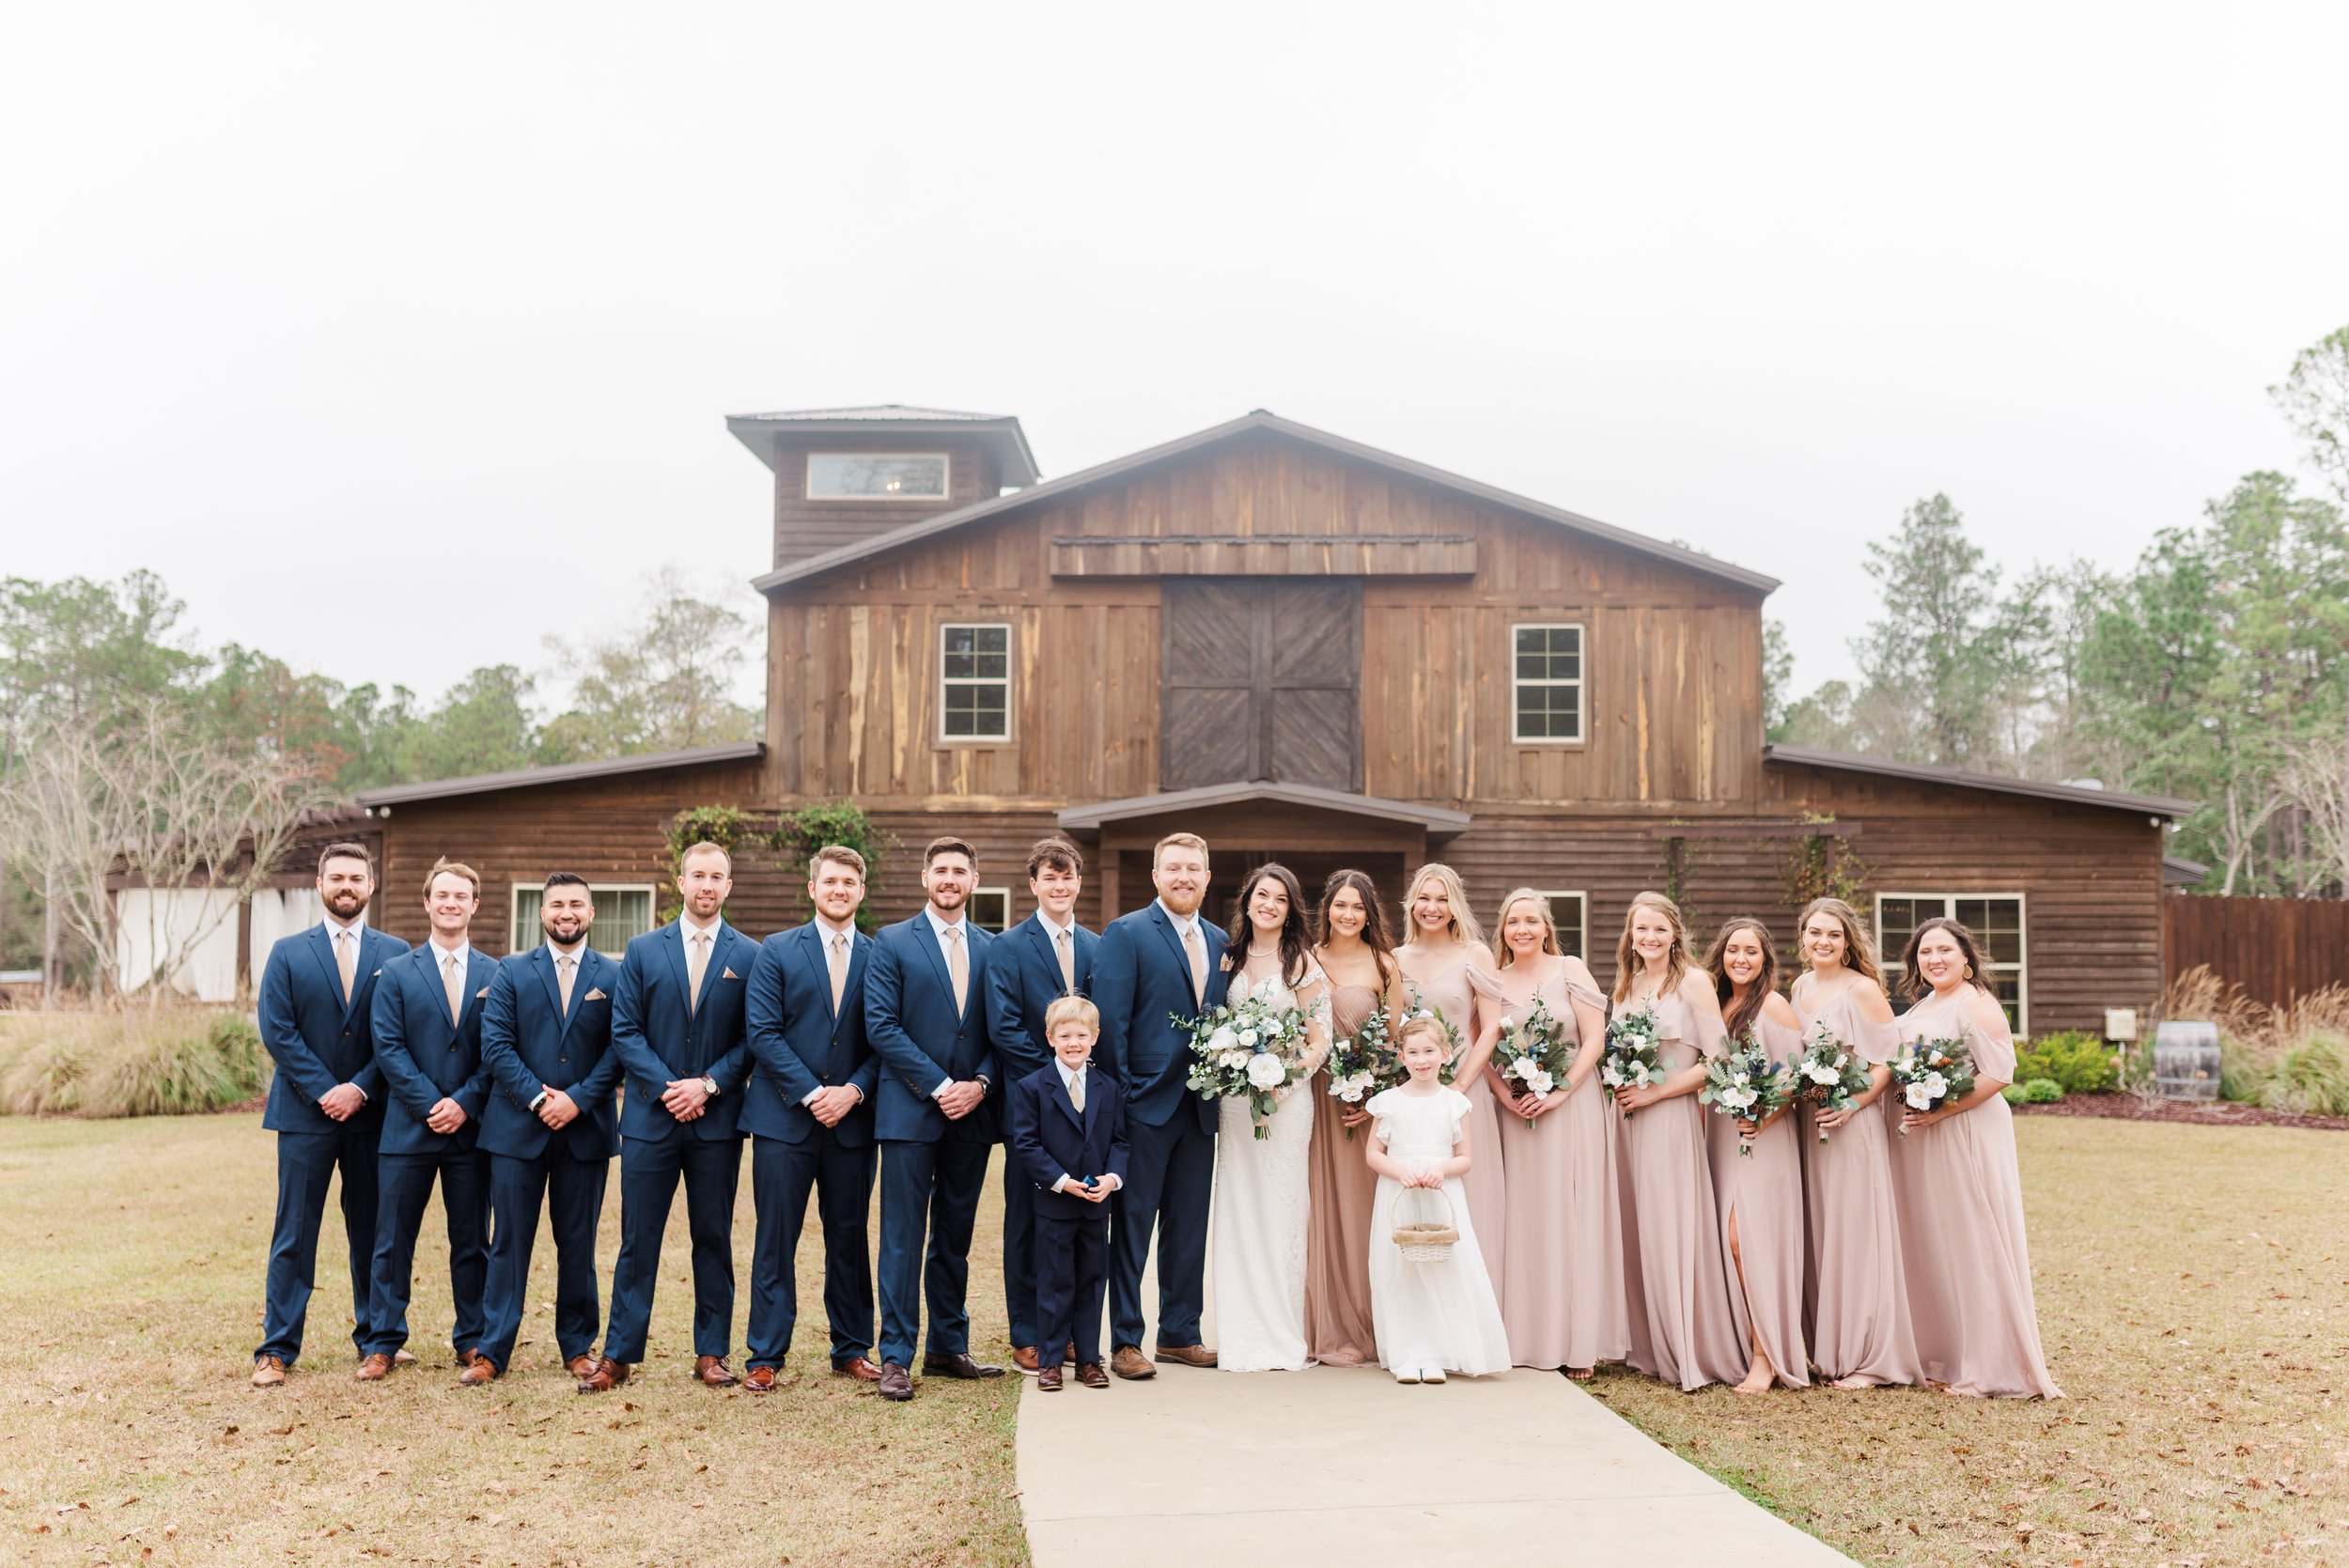 Winter Wedding at Izenstone in Spanish Fort Alabama Photographed by Kristen Marcus Photography